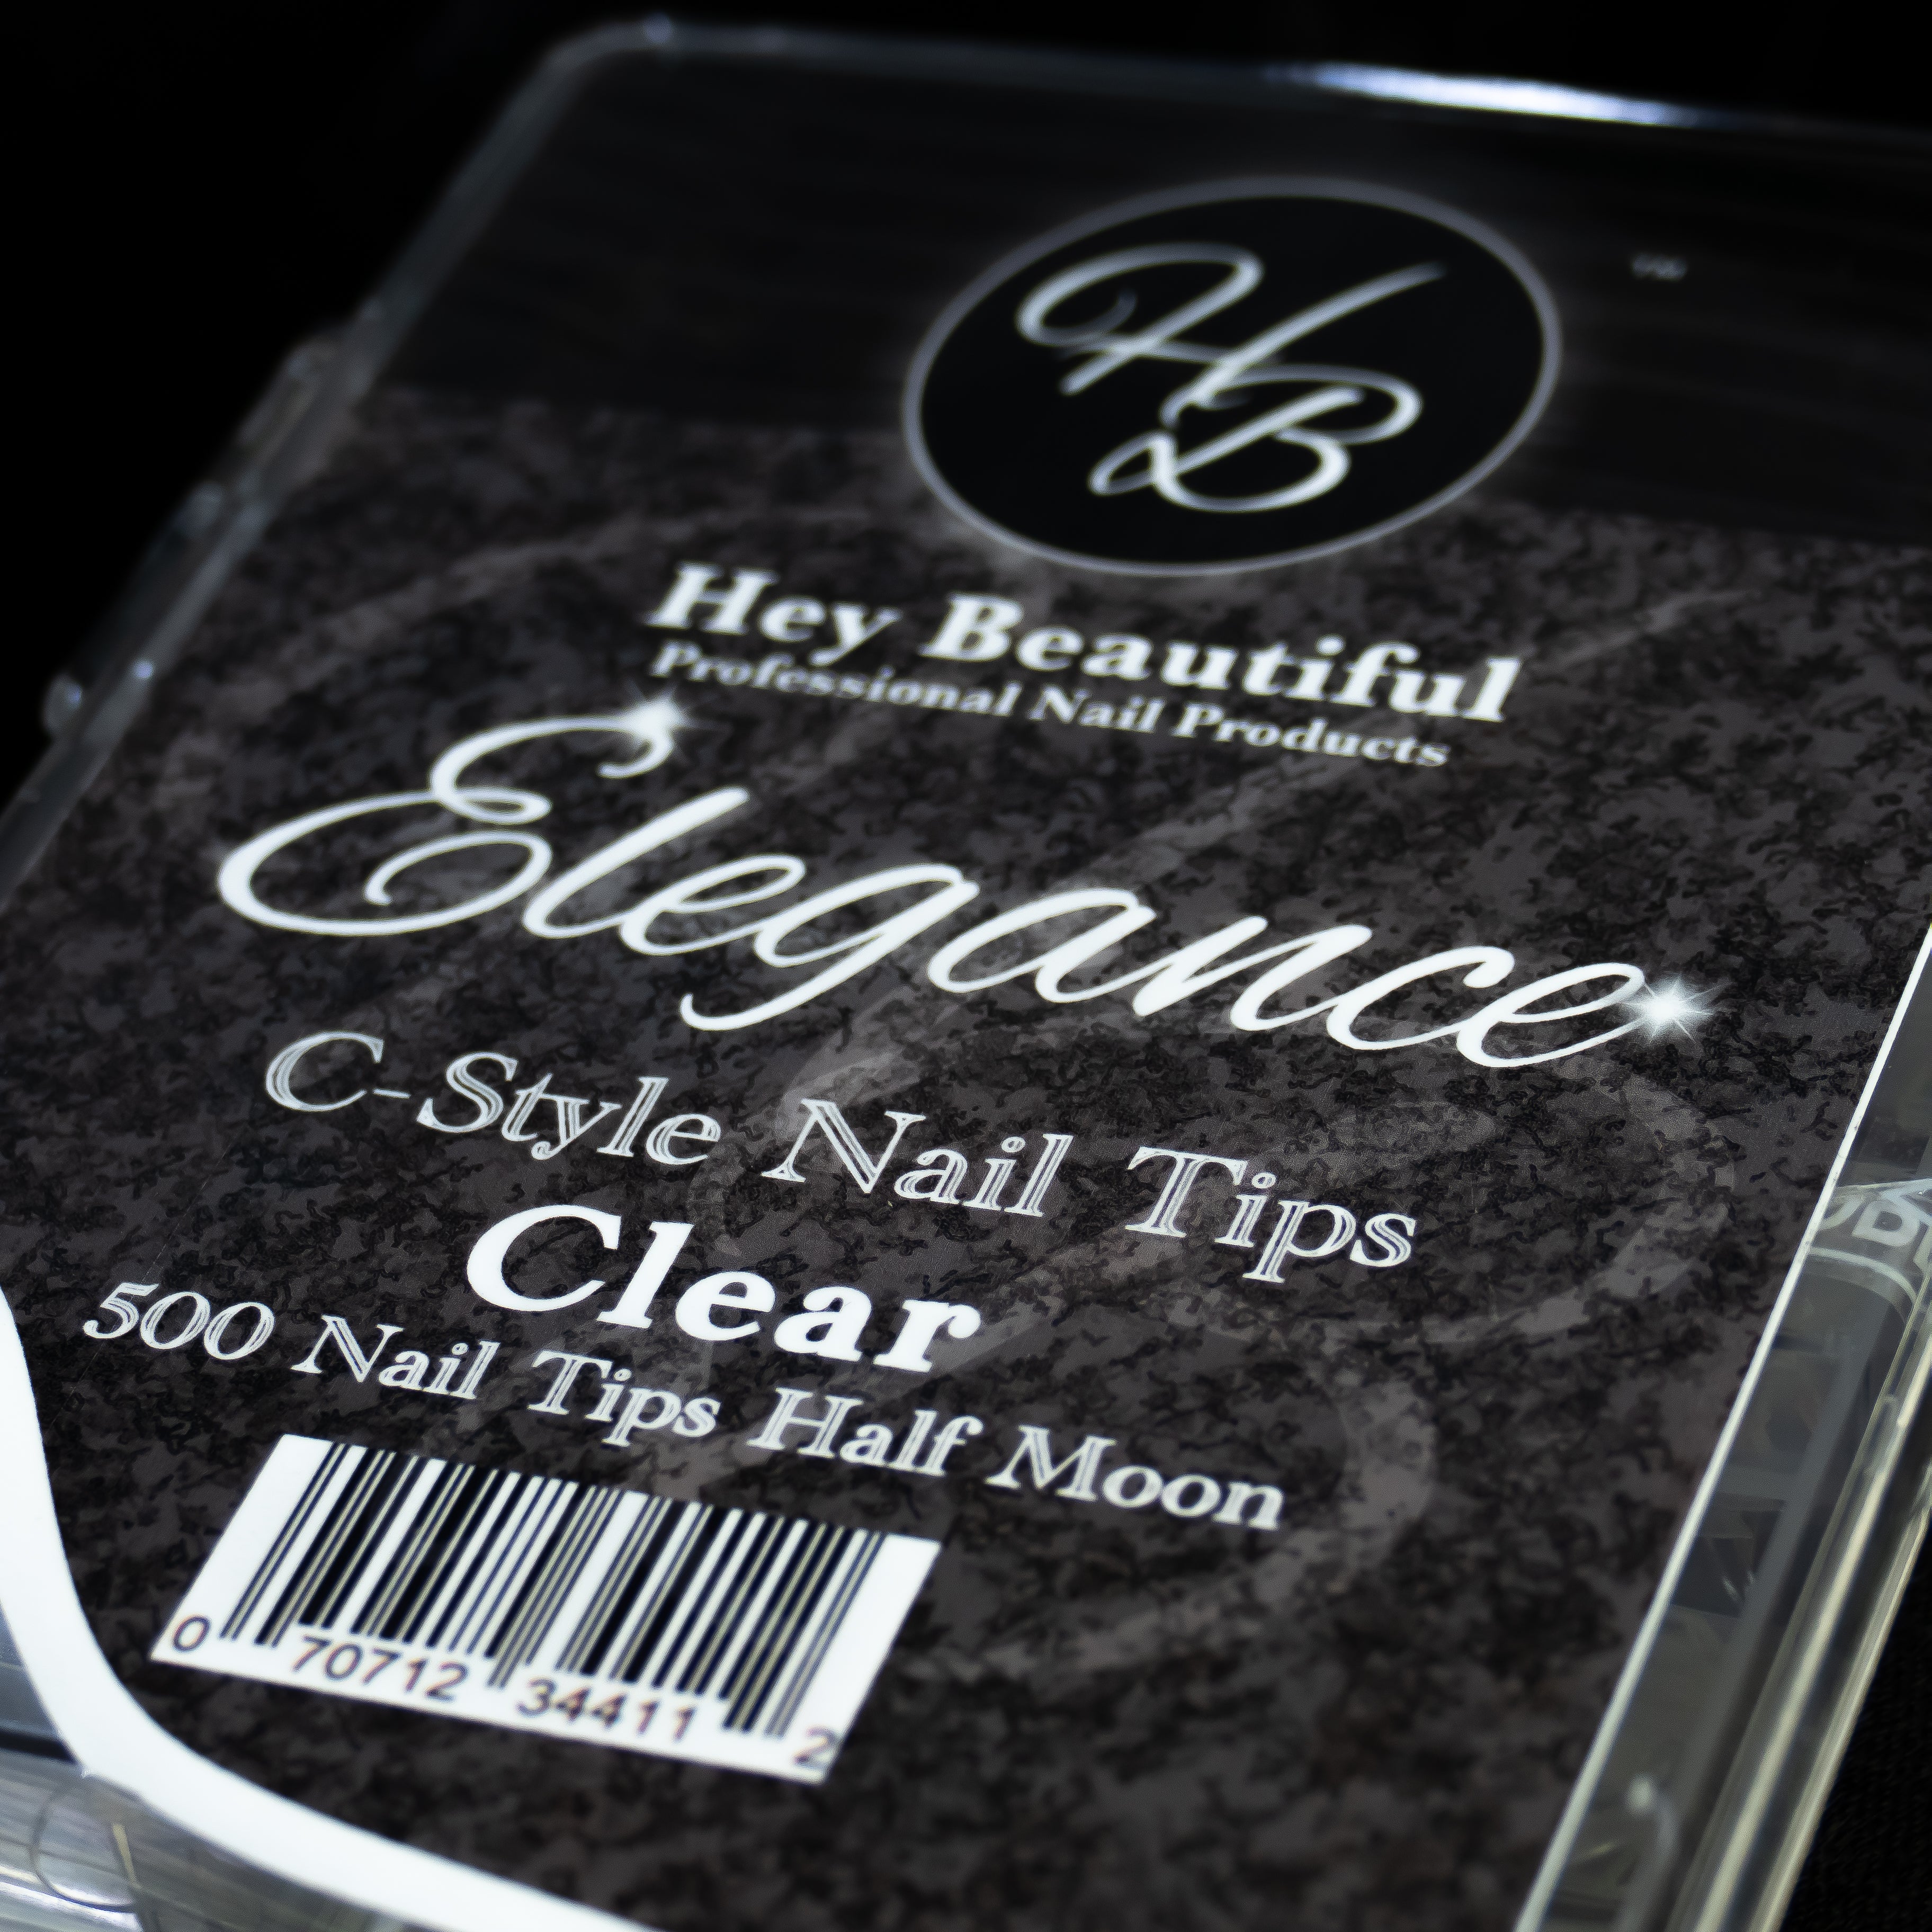 Elegance C-Style Nail Tips (500 tips)